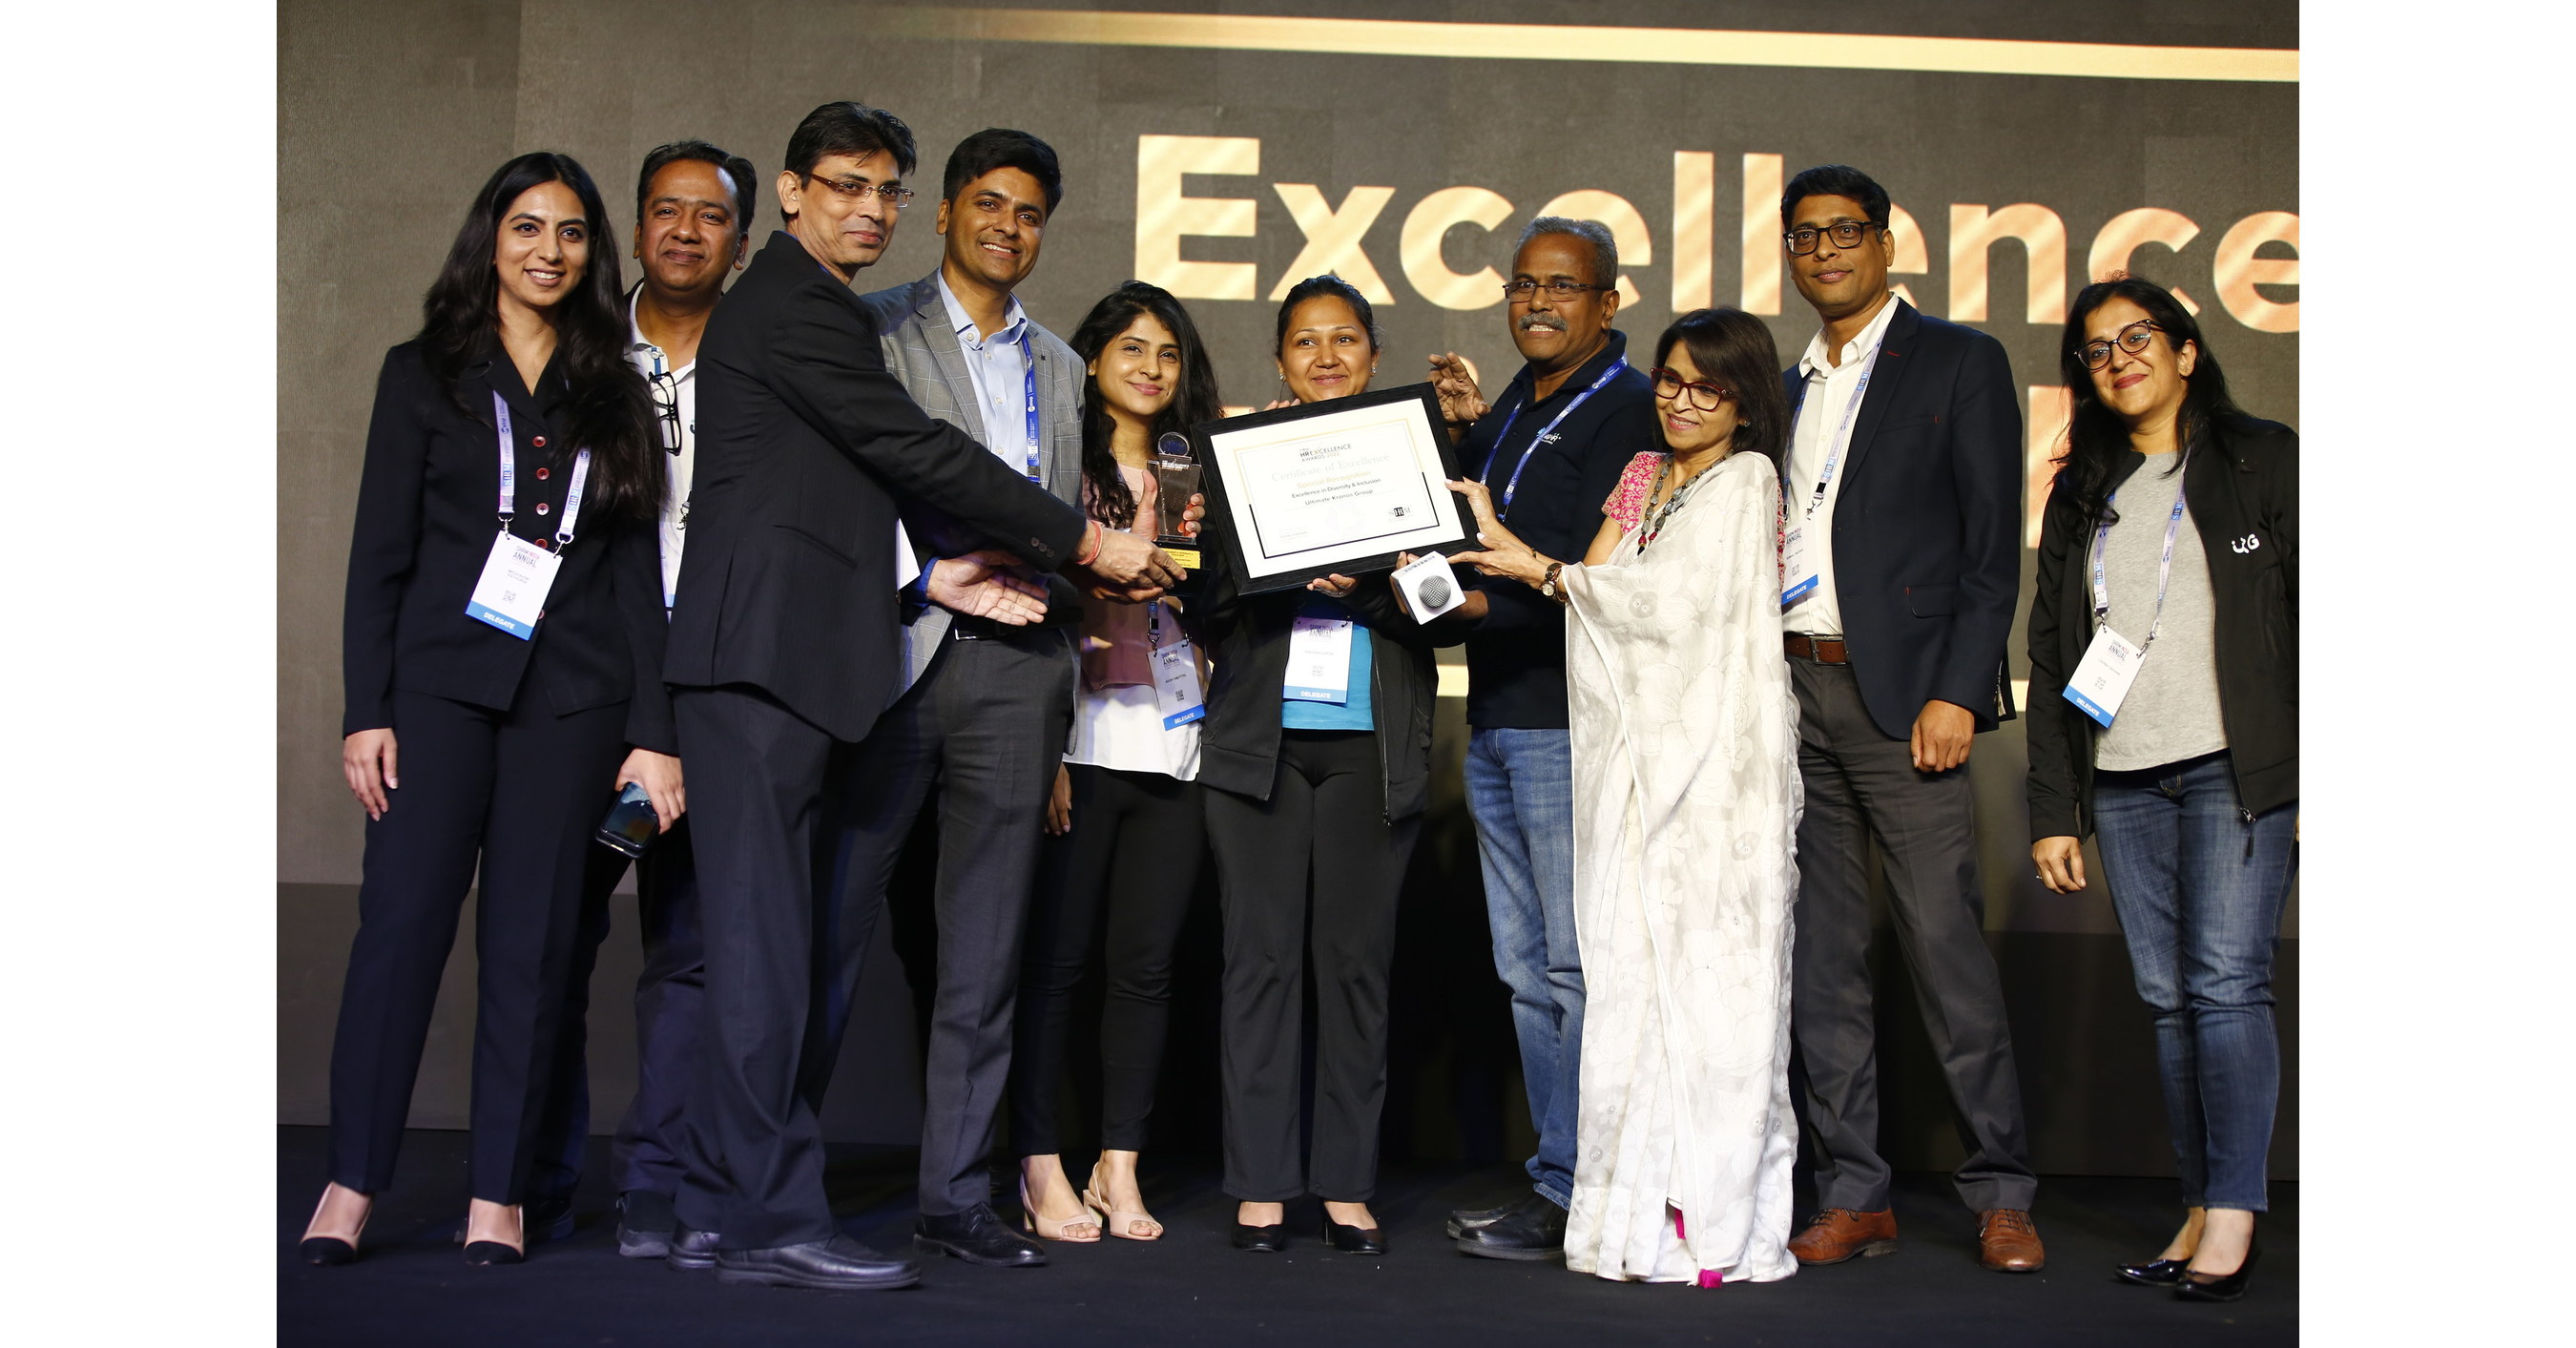 UKG Earns Special Recognition from SHRM India for Excellence in